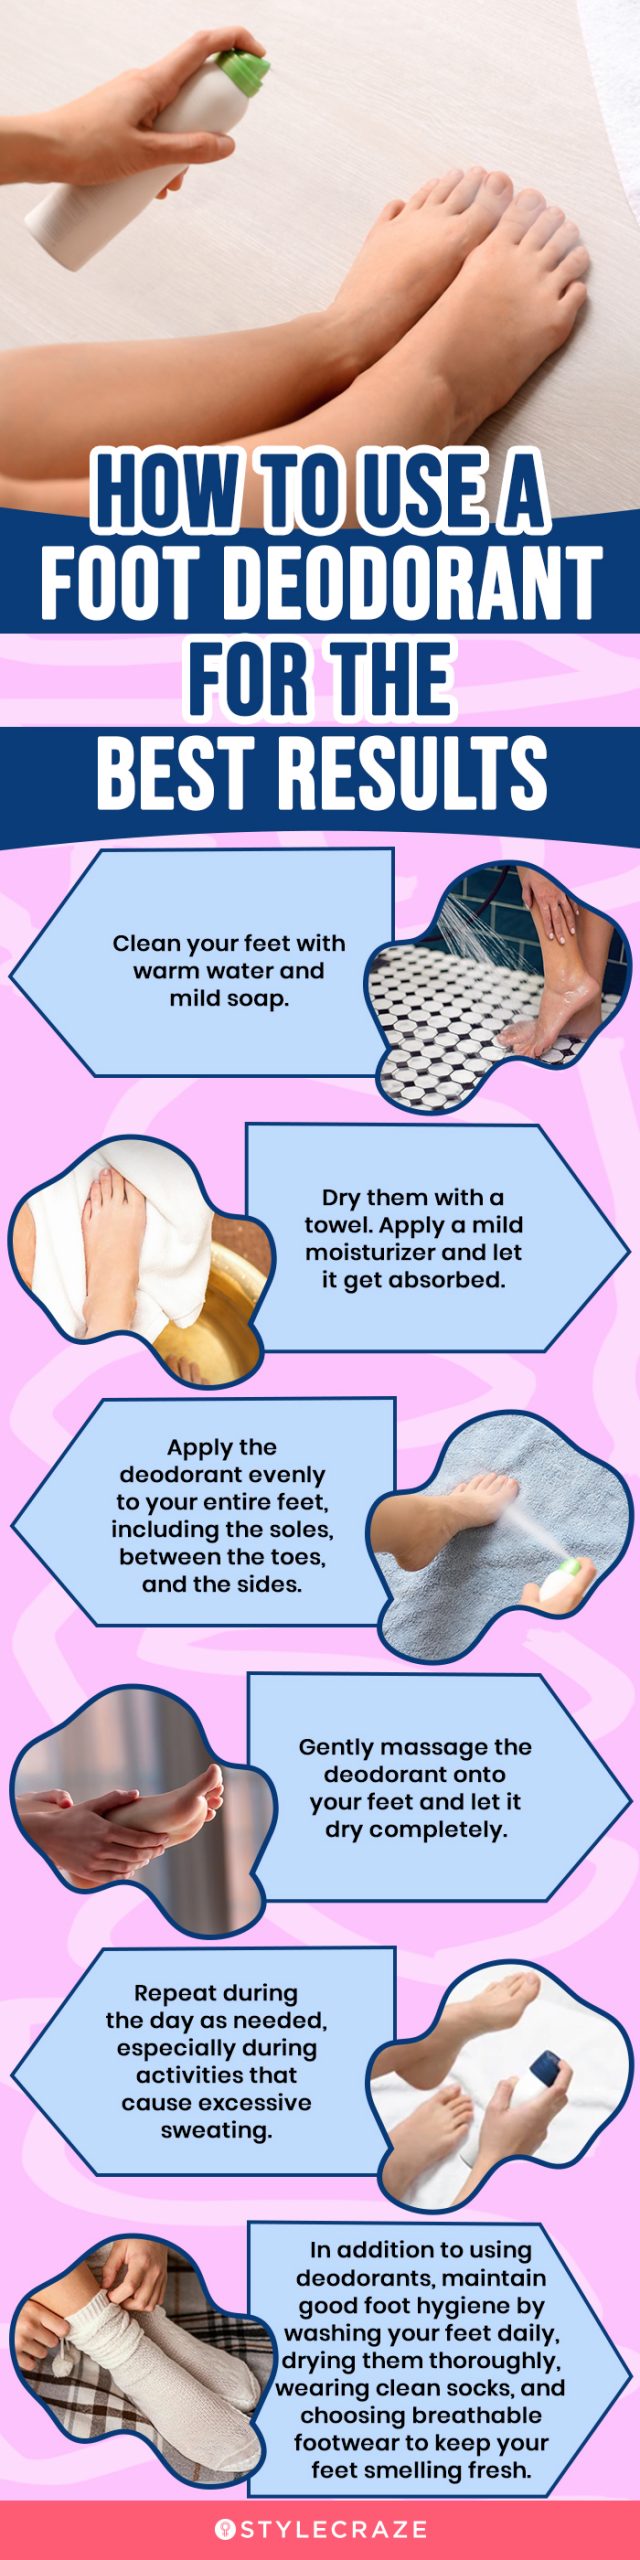 How To Use Foot Deodorant For The Best Results (infographic)